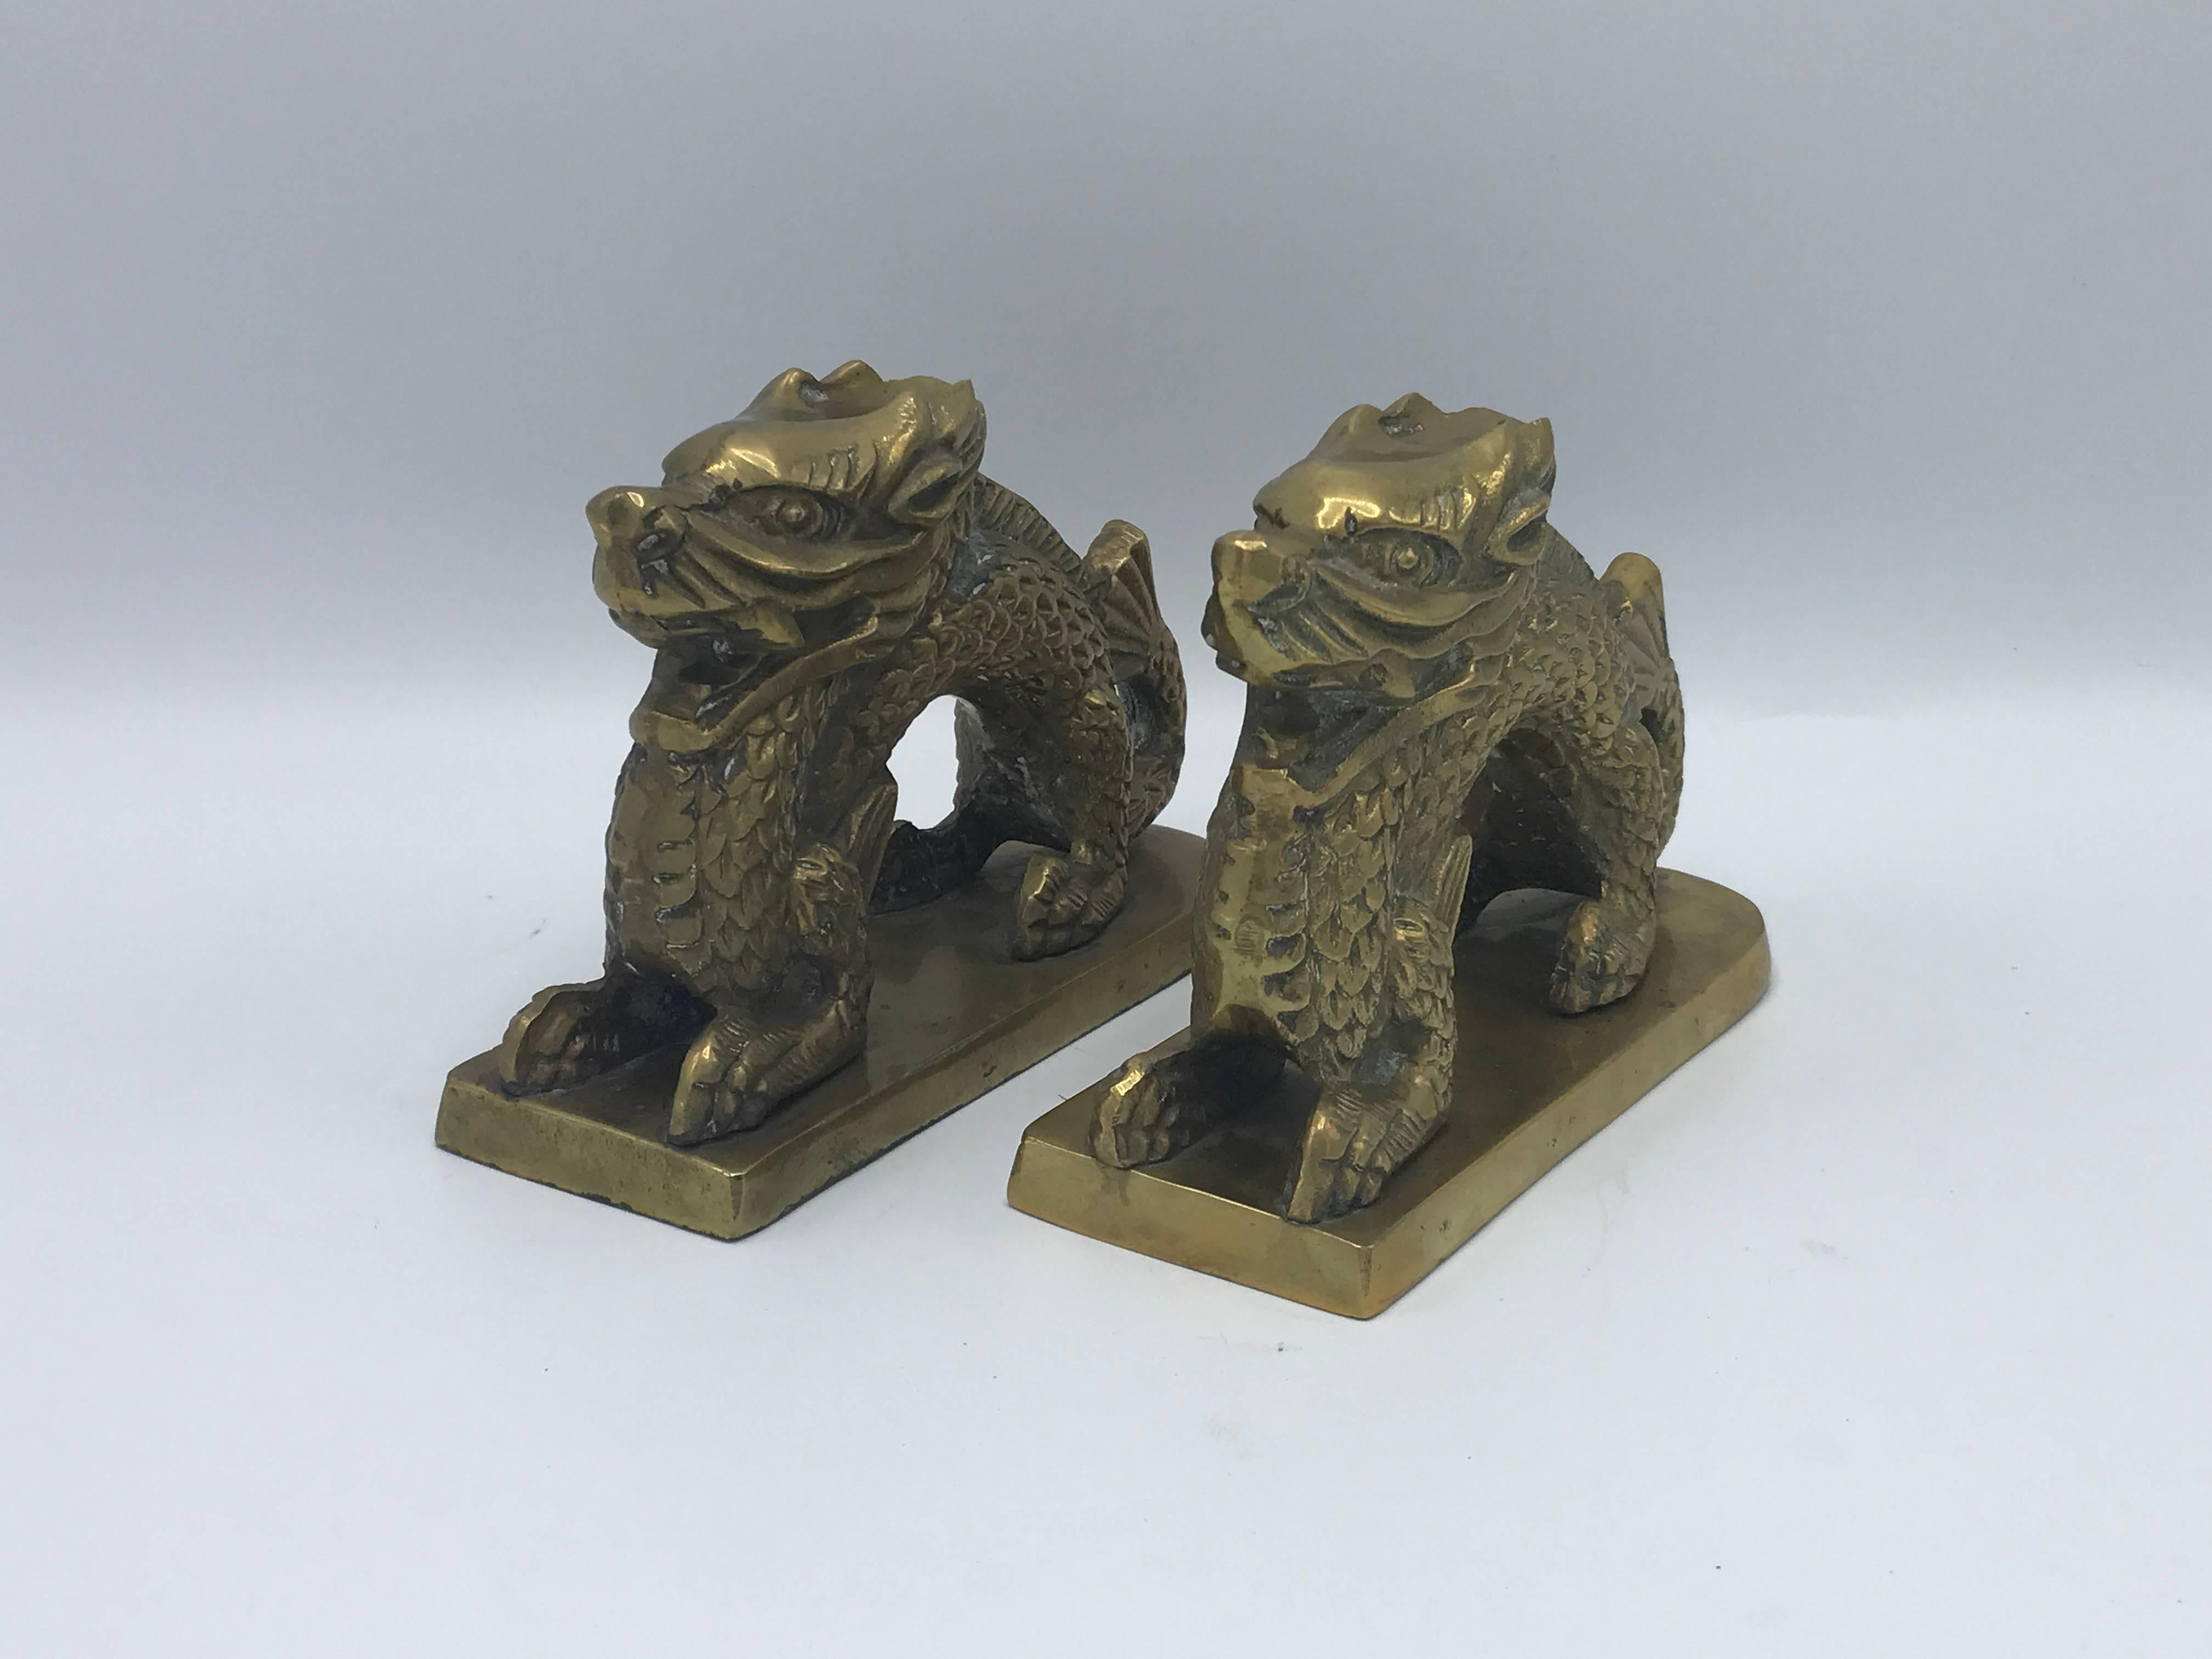 Offered is a stunning pair of 1960s solid brass Chinoiserie dragon bookends. Heavy.